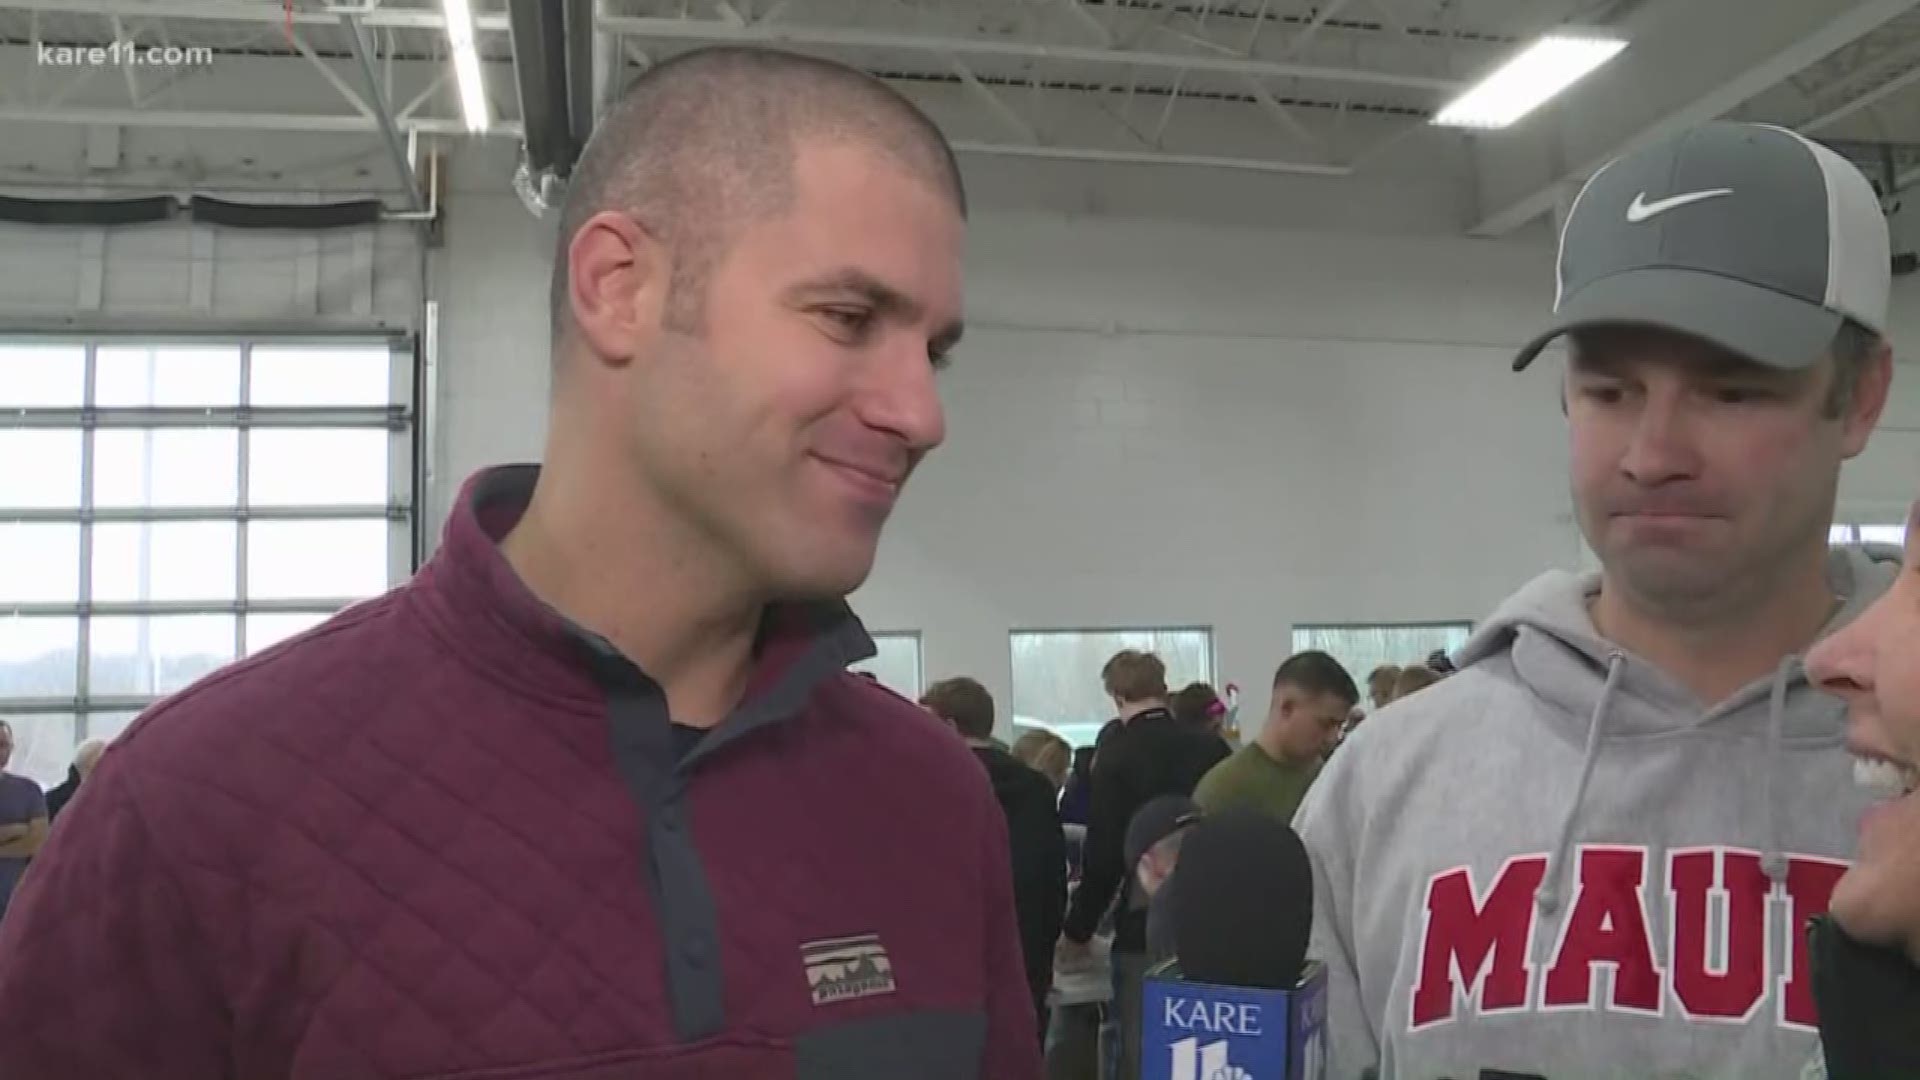 In an effort to build 1,000 bikes for Toys for Tots, Joe and Jake Mauer were spotted helping out at Mauer Chevrolet in Inver Grove Heights.